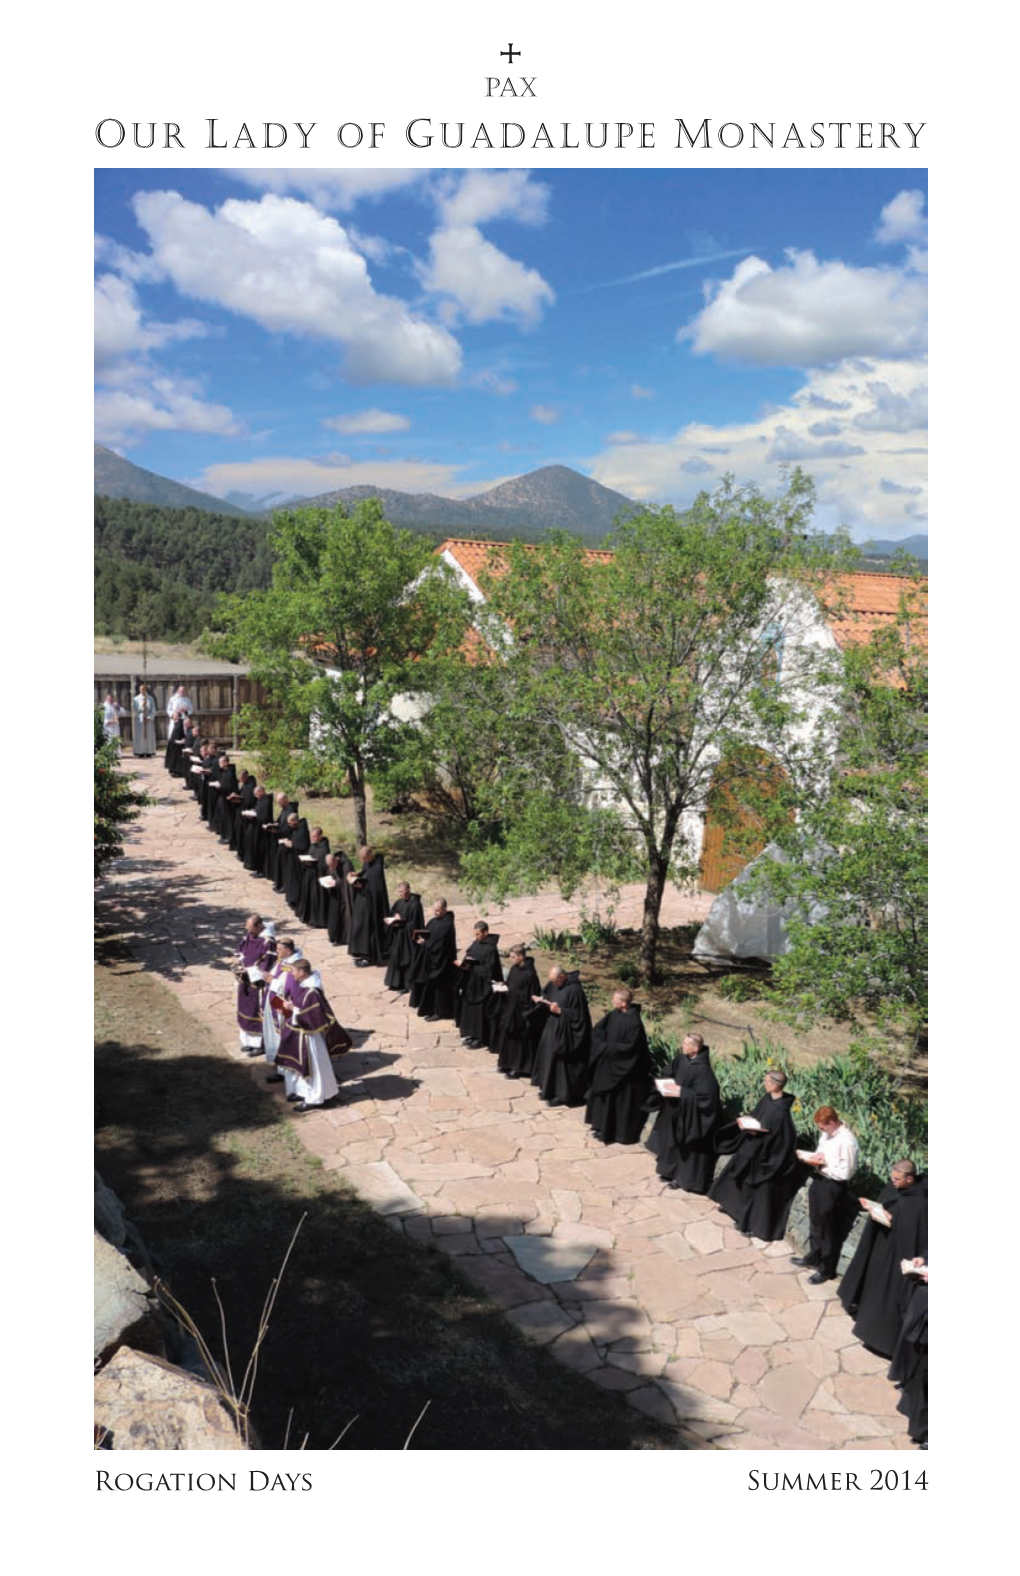 Our Lady of Guadalupe Monastery 142 Joseph Blane Road Silver City, New Mexico 88061 All Donations Are Tax-Deductible